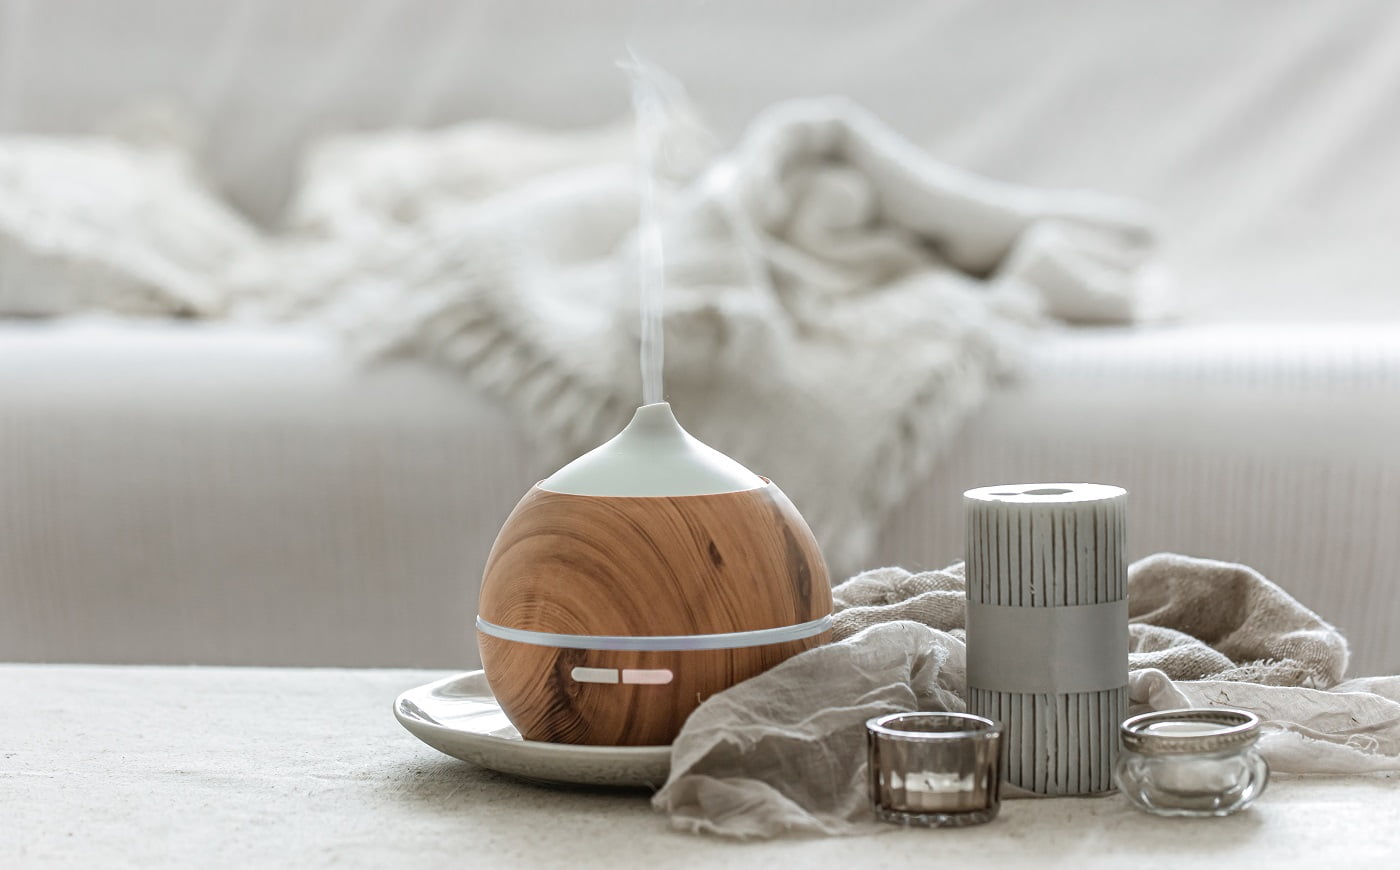 Still life with an aroma diffuser to humidify the air and interior decor details in a Scandinavian style.